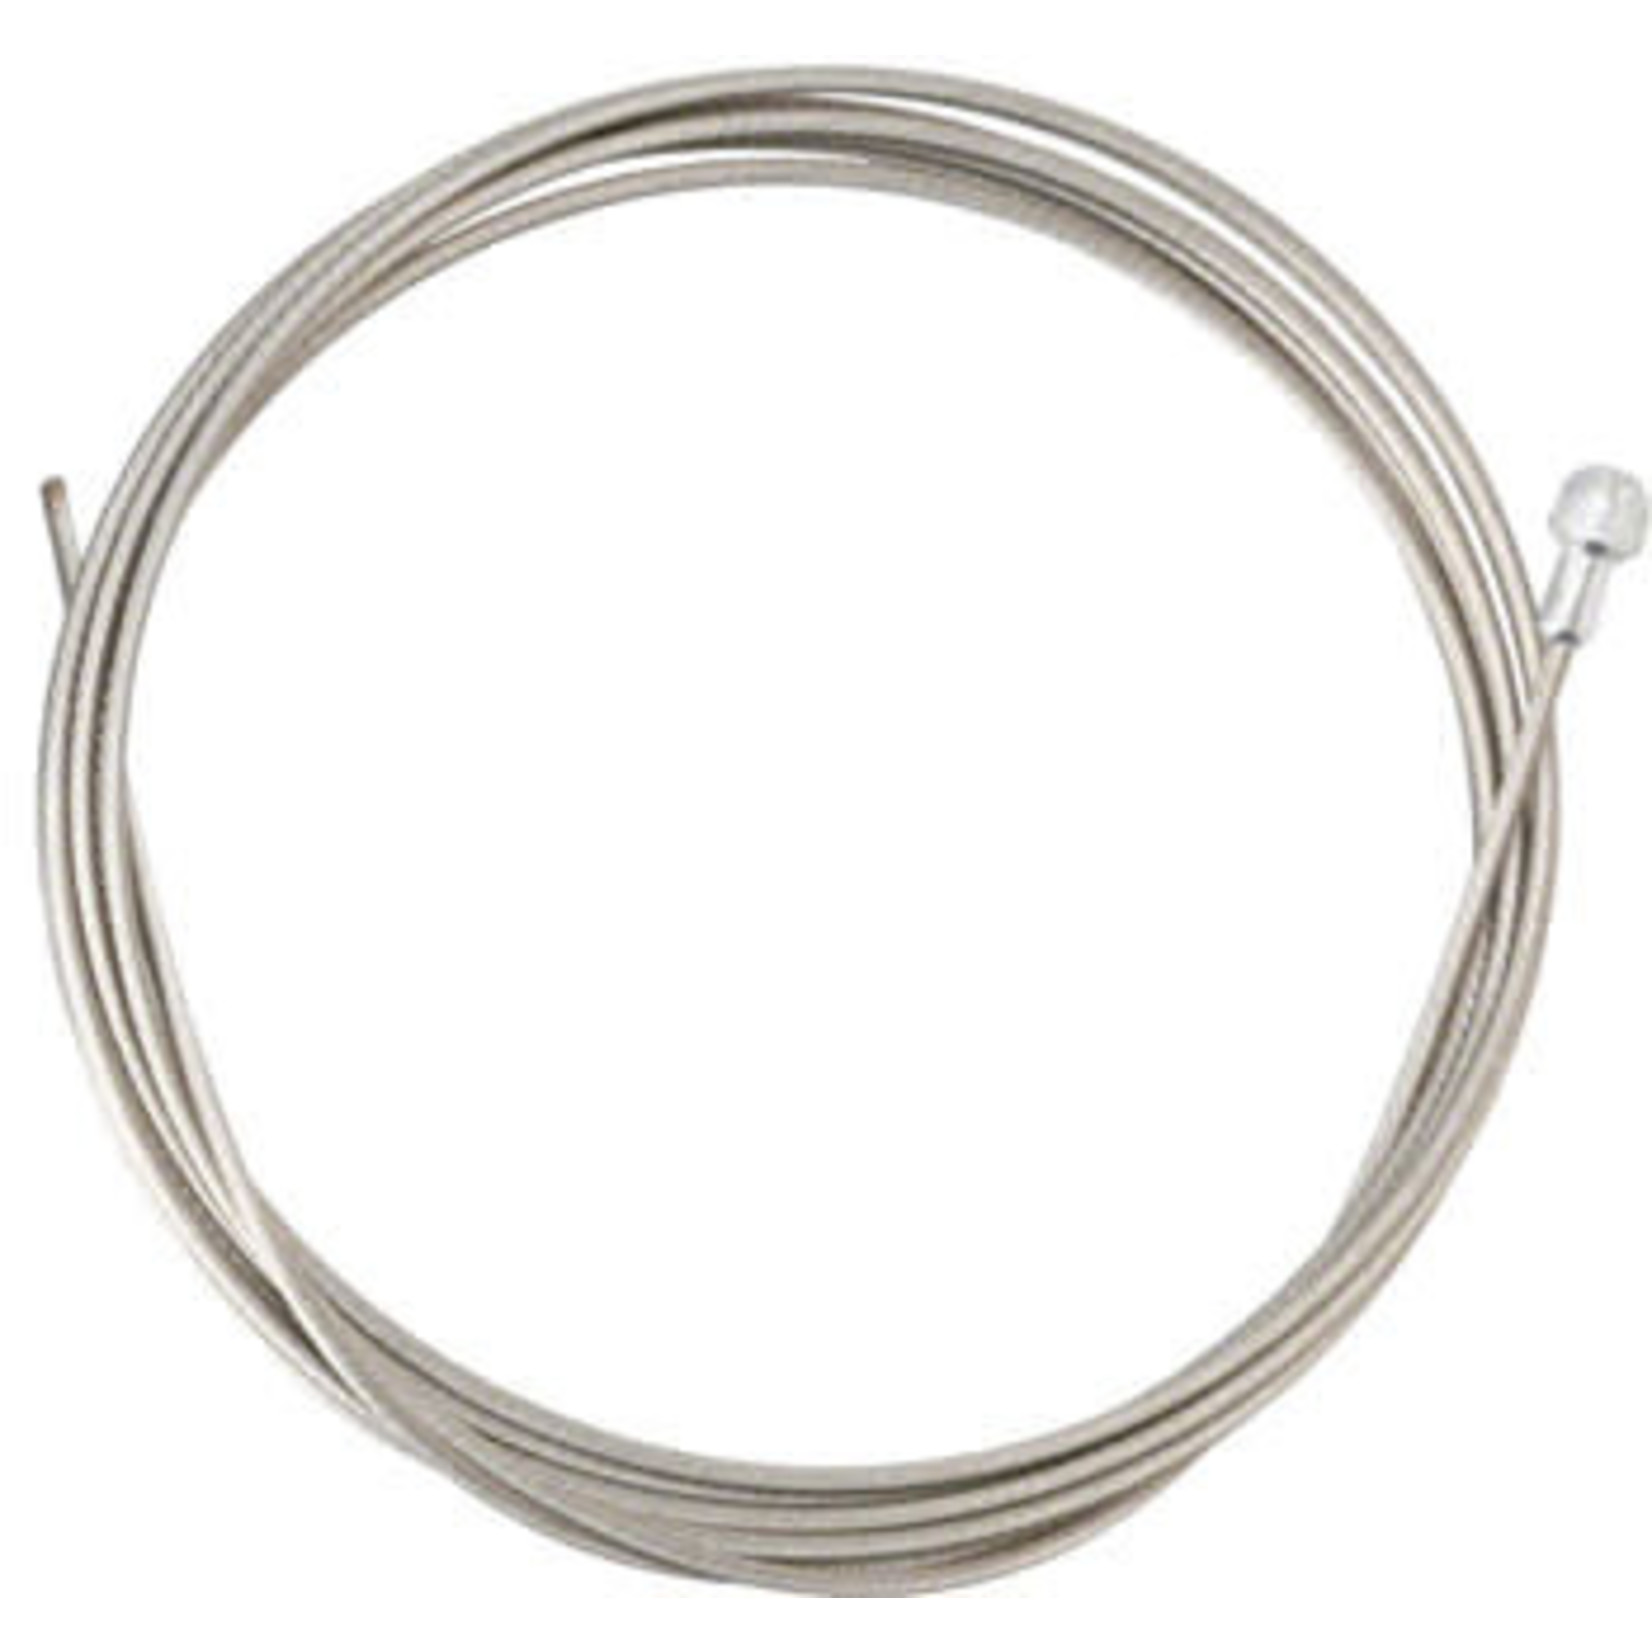 Shimano Shimano Road Inner Brake Cable 2.05m x 1.6mm Stainless